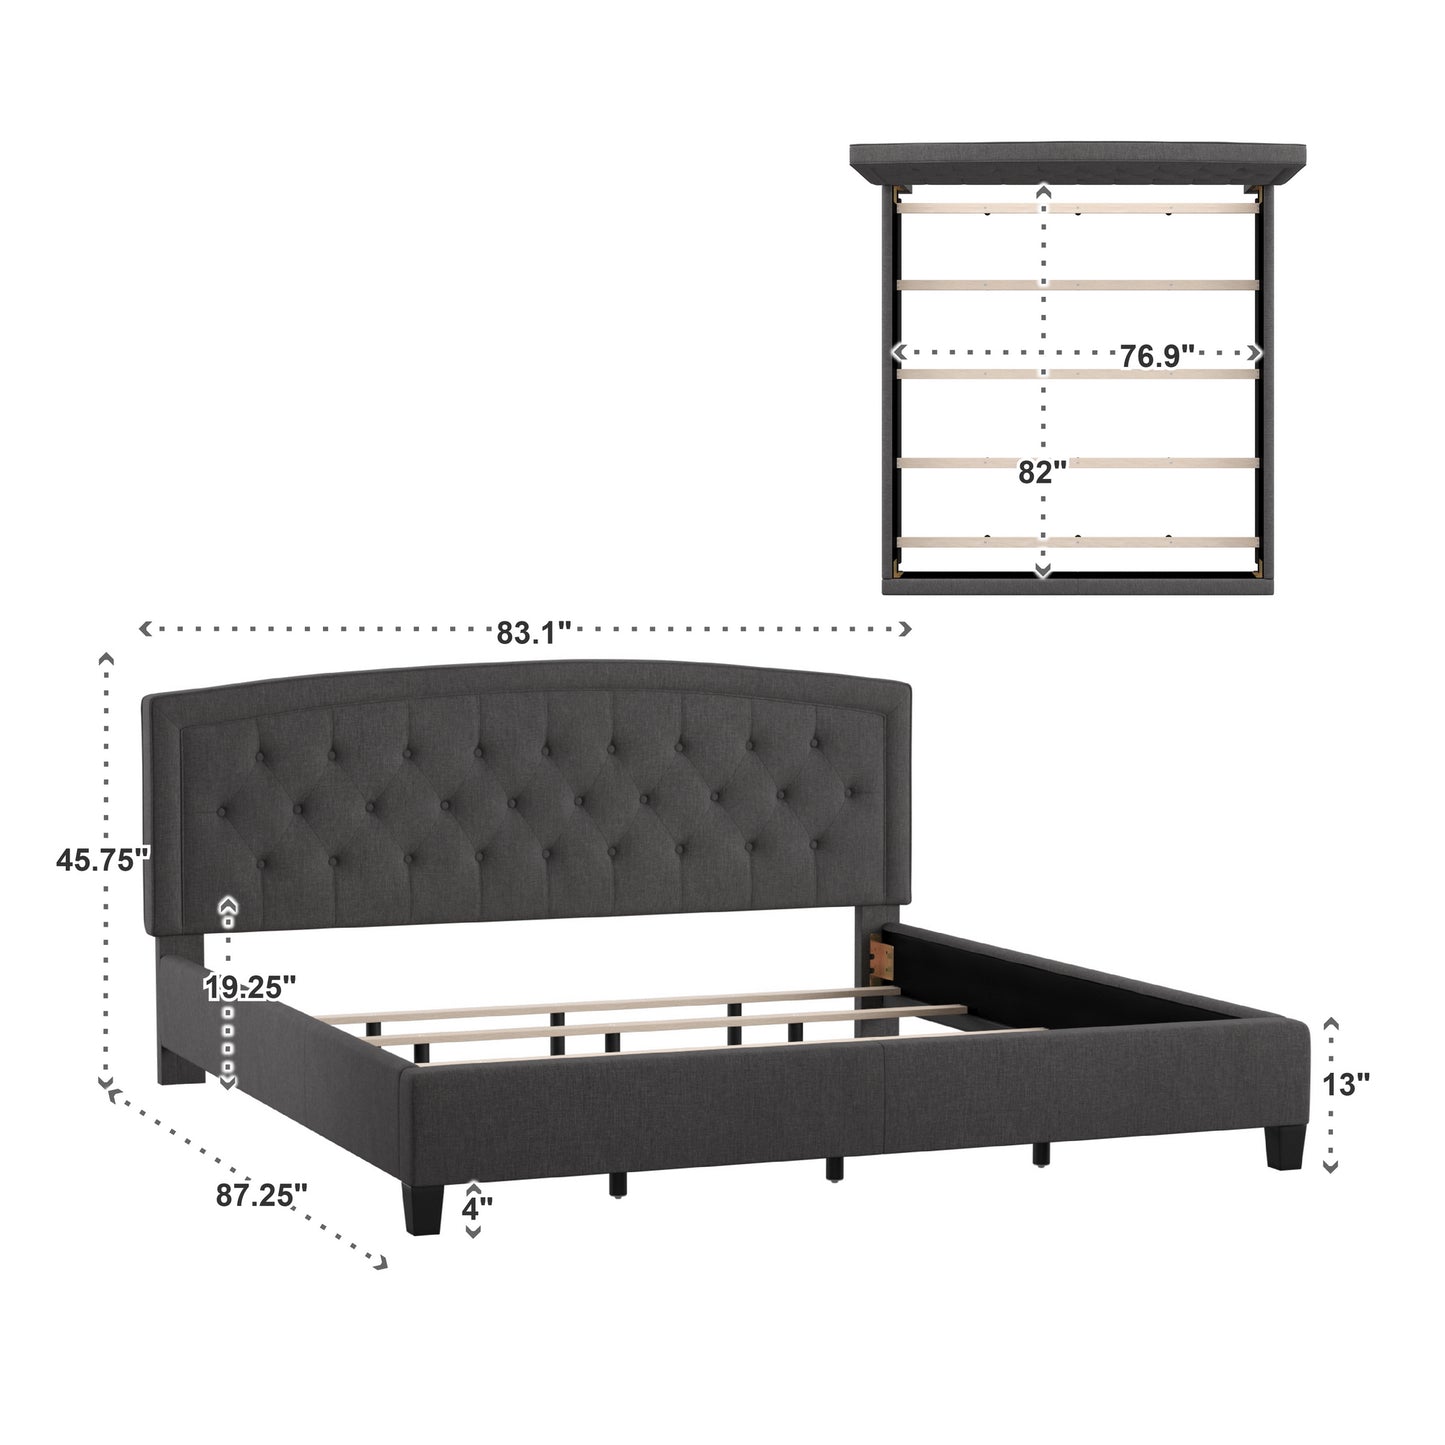 Adjustable Diamond-Tufted Arch-Back Bed - Charcoal, King